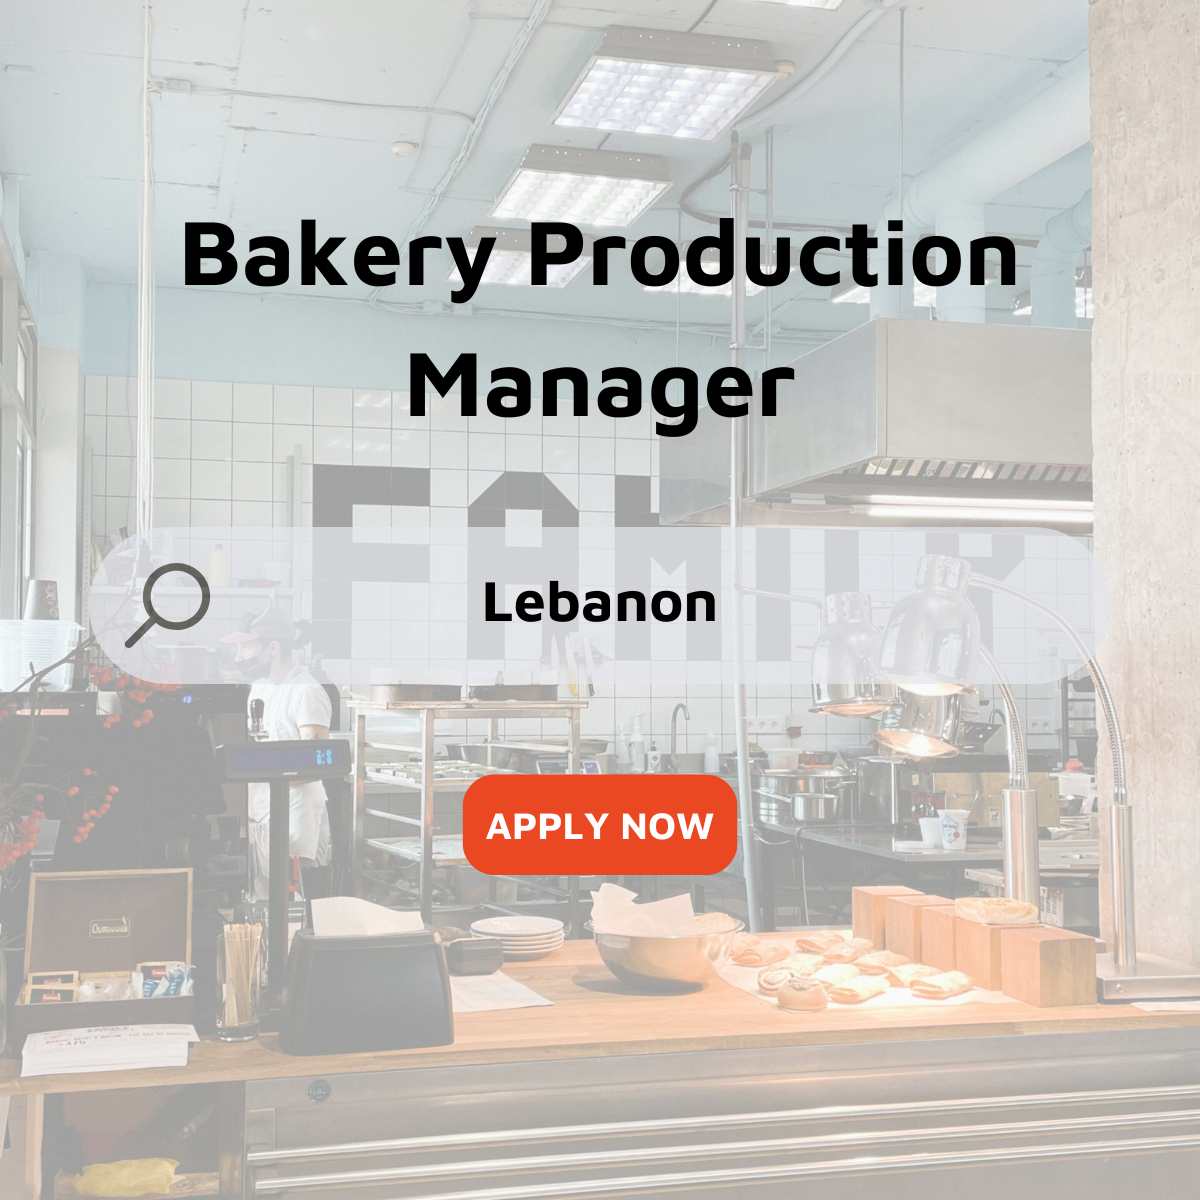 Bakery Production Manager